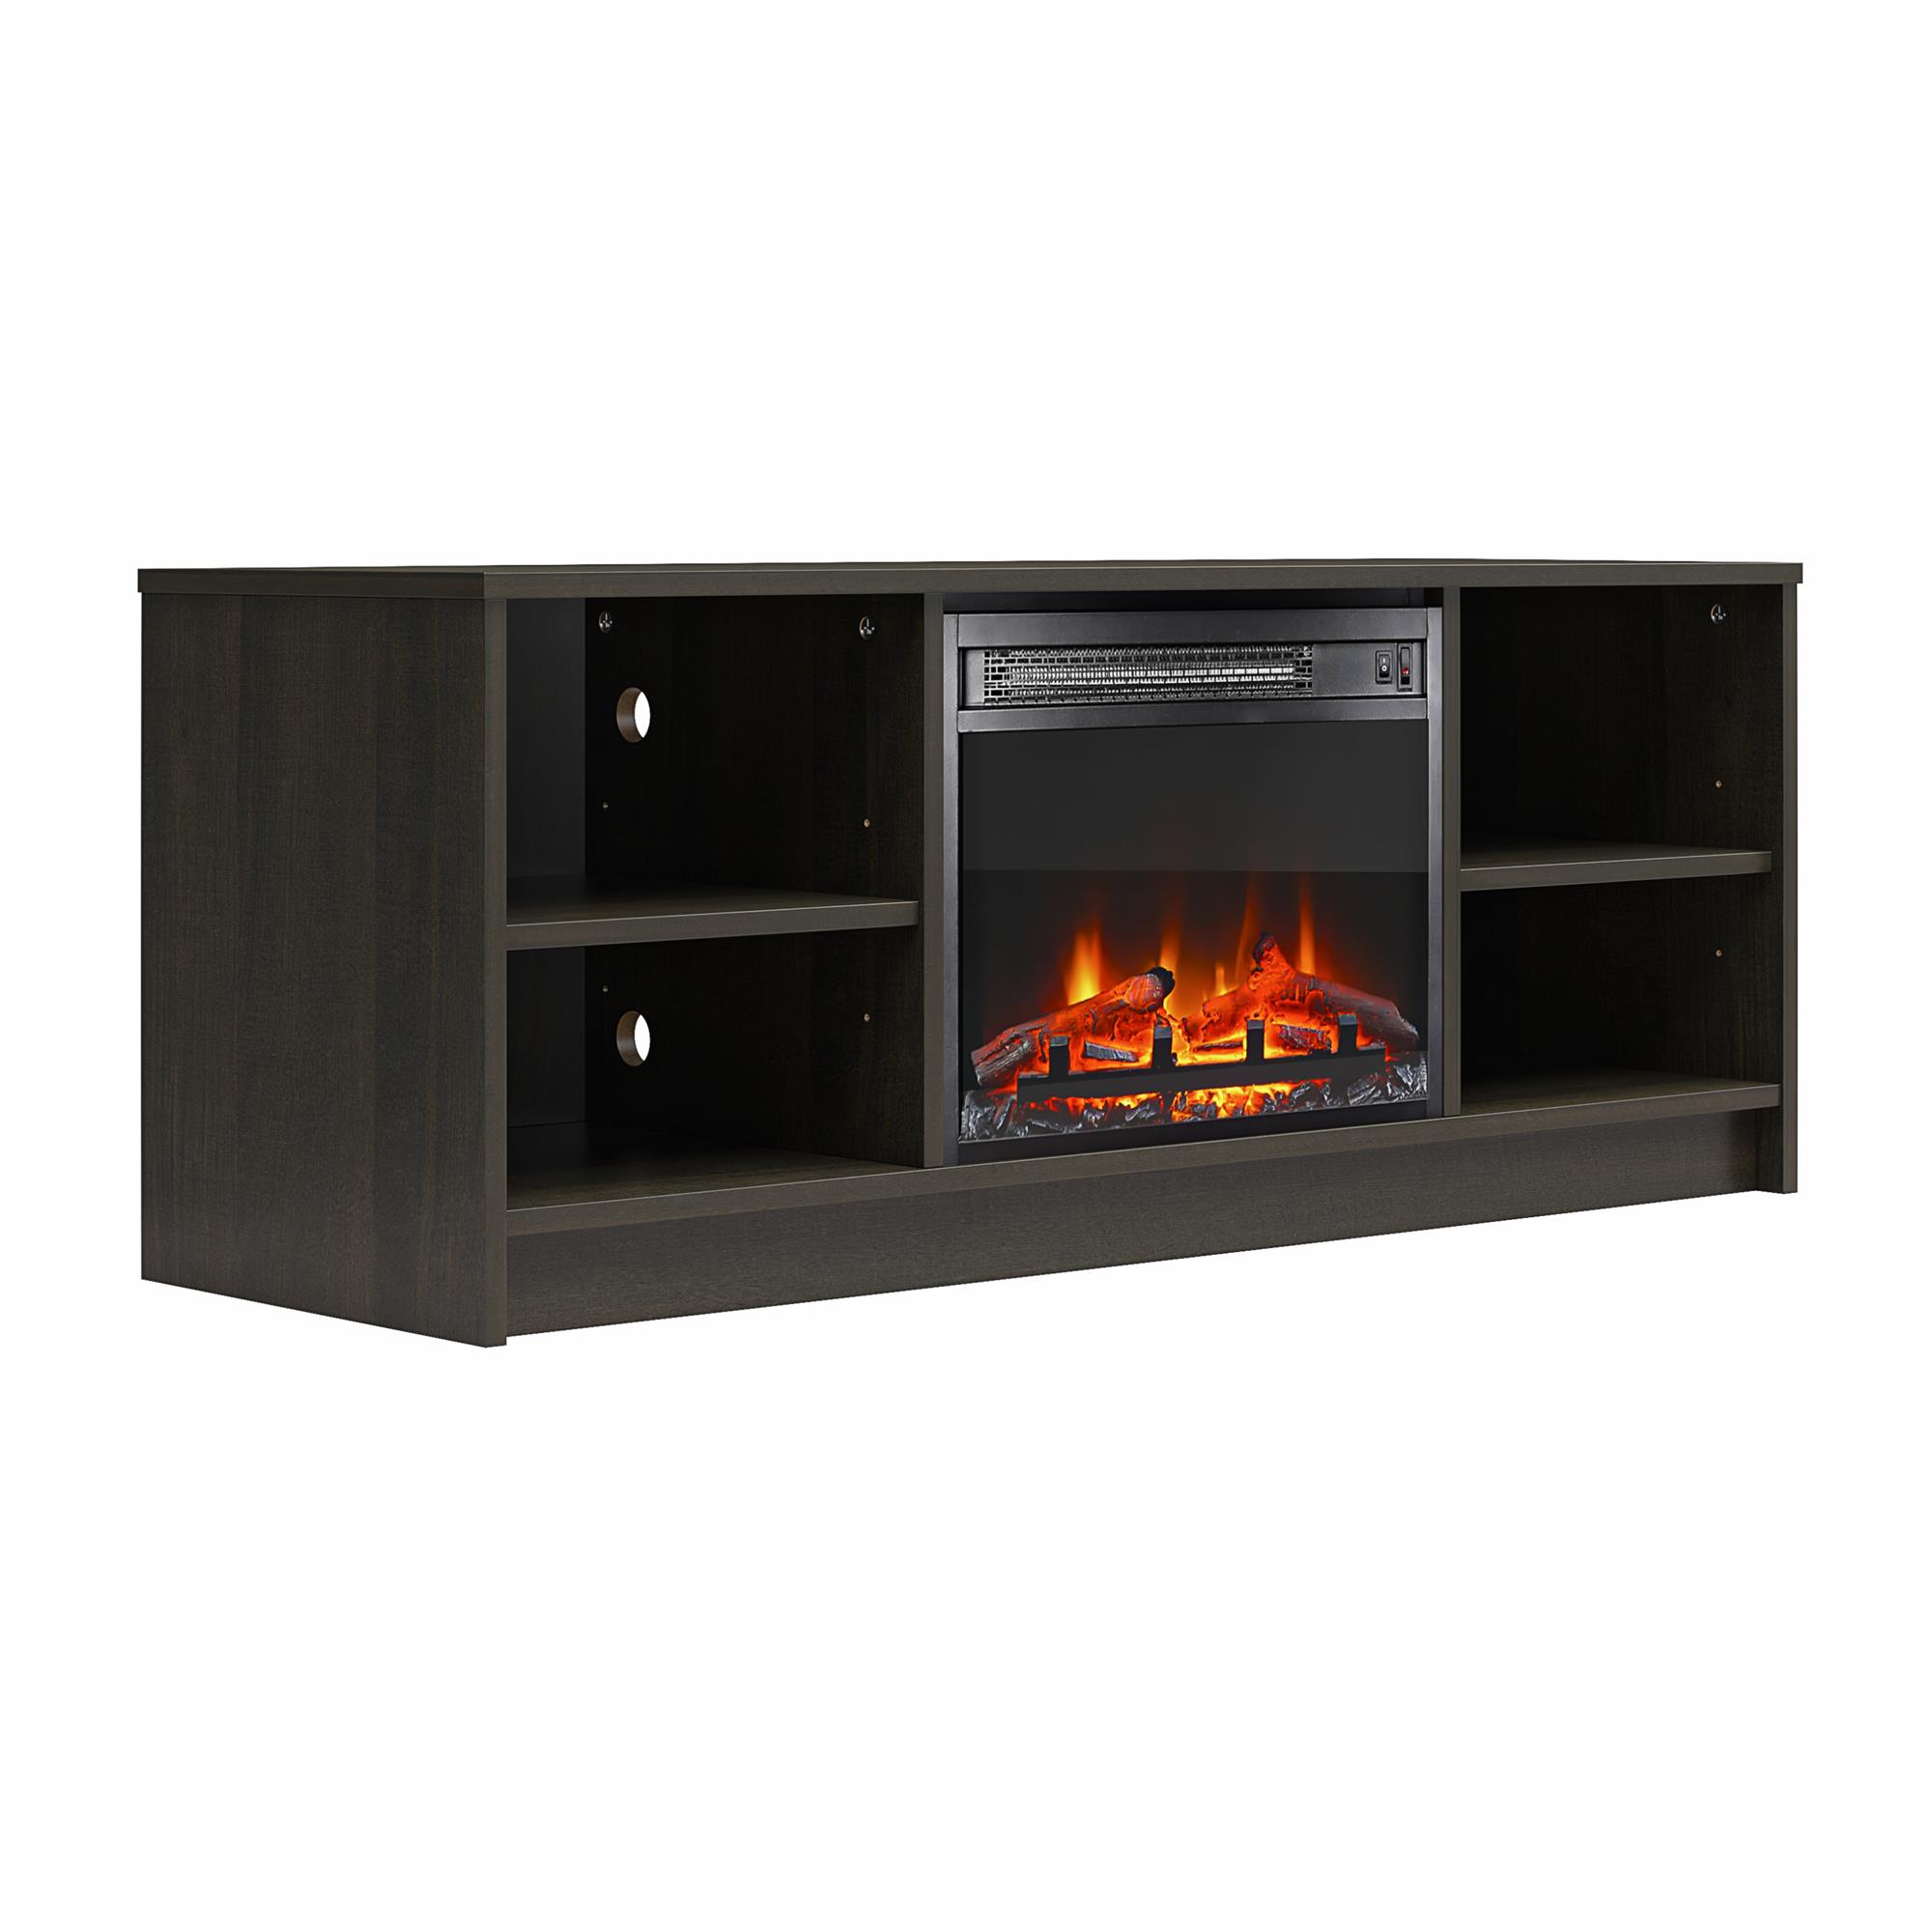 Mainstays Fireplace TV Stand, for TVs up to 55", Espresso - image 3 of 12